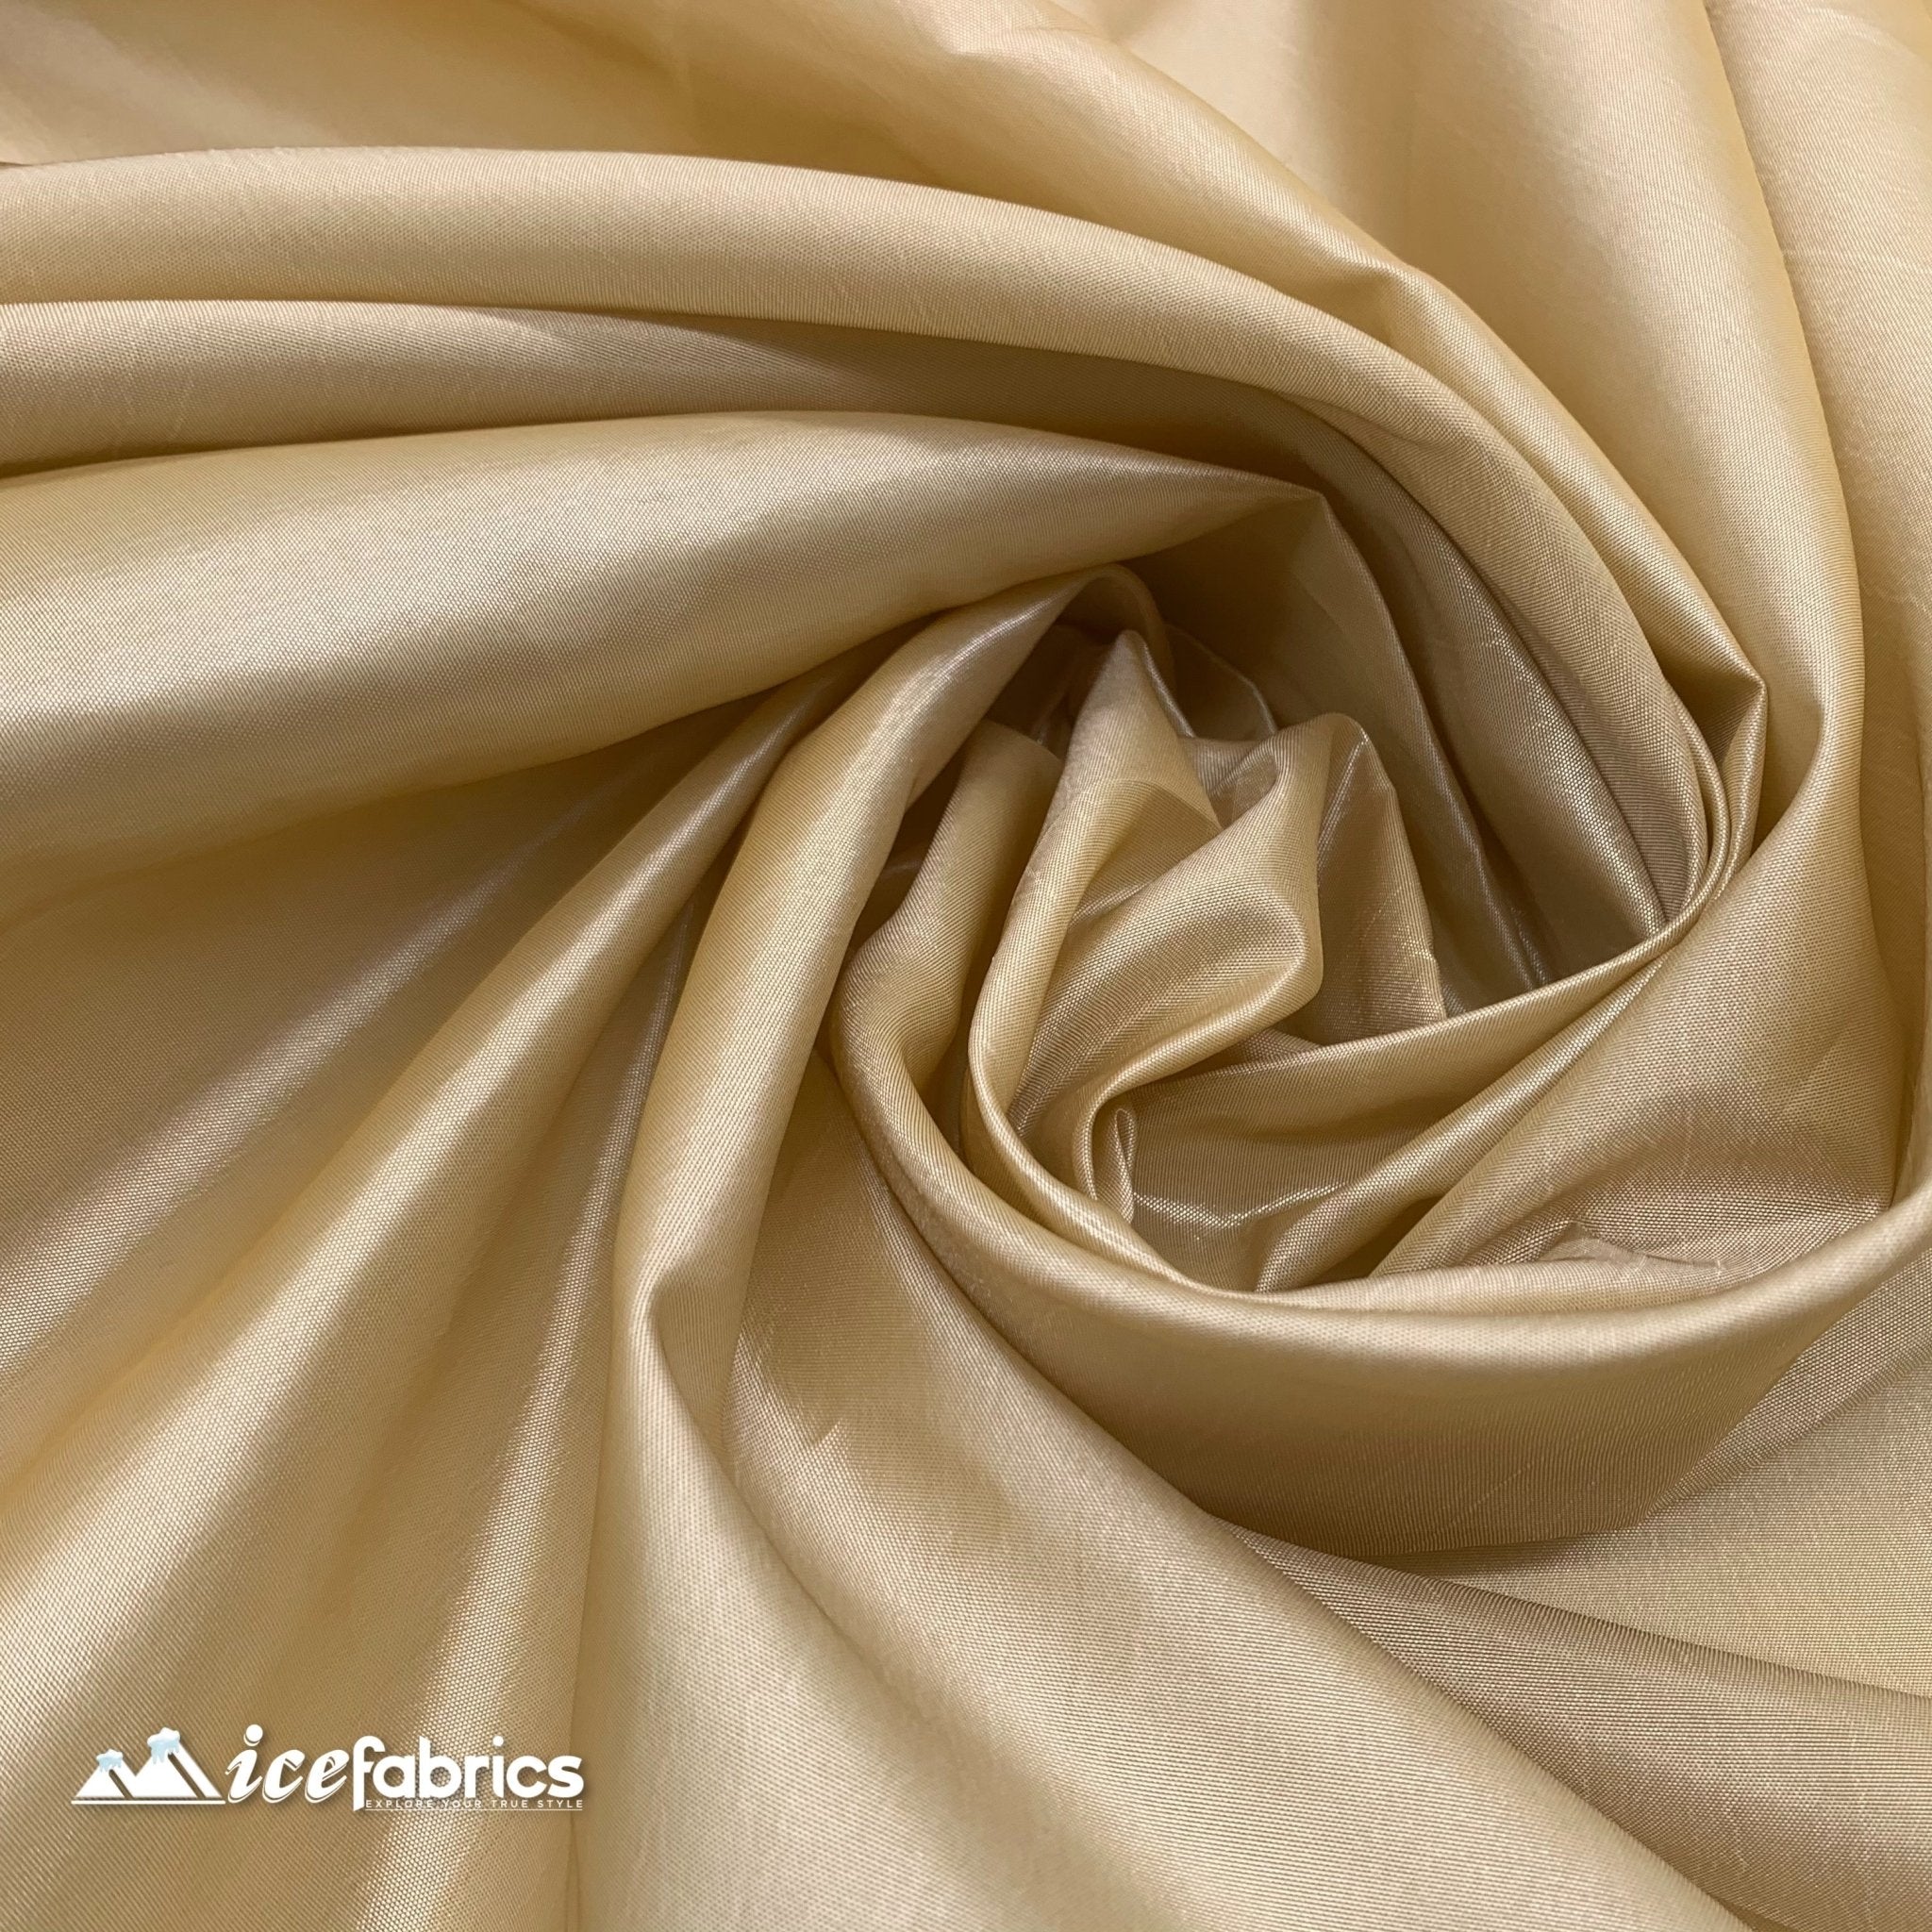 High Quality Solid Taffeta Fabric_ 60" Width_ By The YardTaffeta FabricICEFABRICICE FABRICSWhiteHigh Quality Solid Taffeta Fabric_ 60" Width_ By The YardTaffeta FabricICEFABRICICE FABRICSChampagneHigh Quality Solid Taffeta Fabric_ 60" Width_ By The Yard ICEFABRIC Champagne